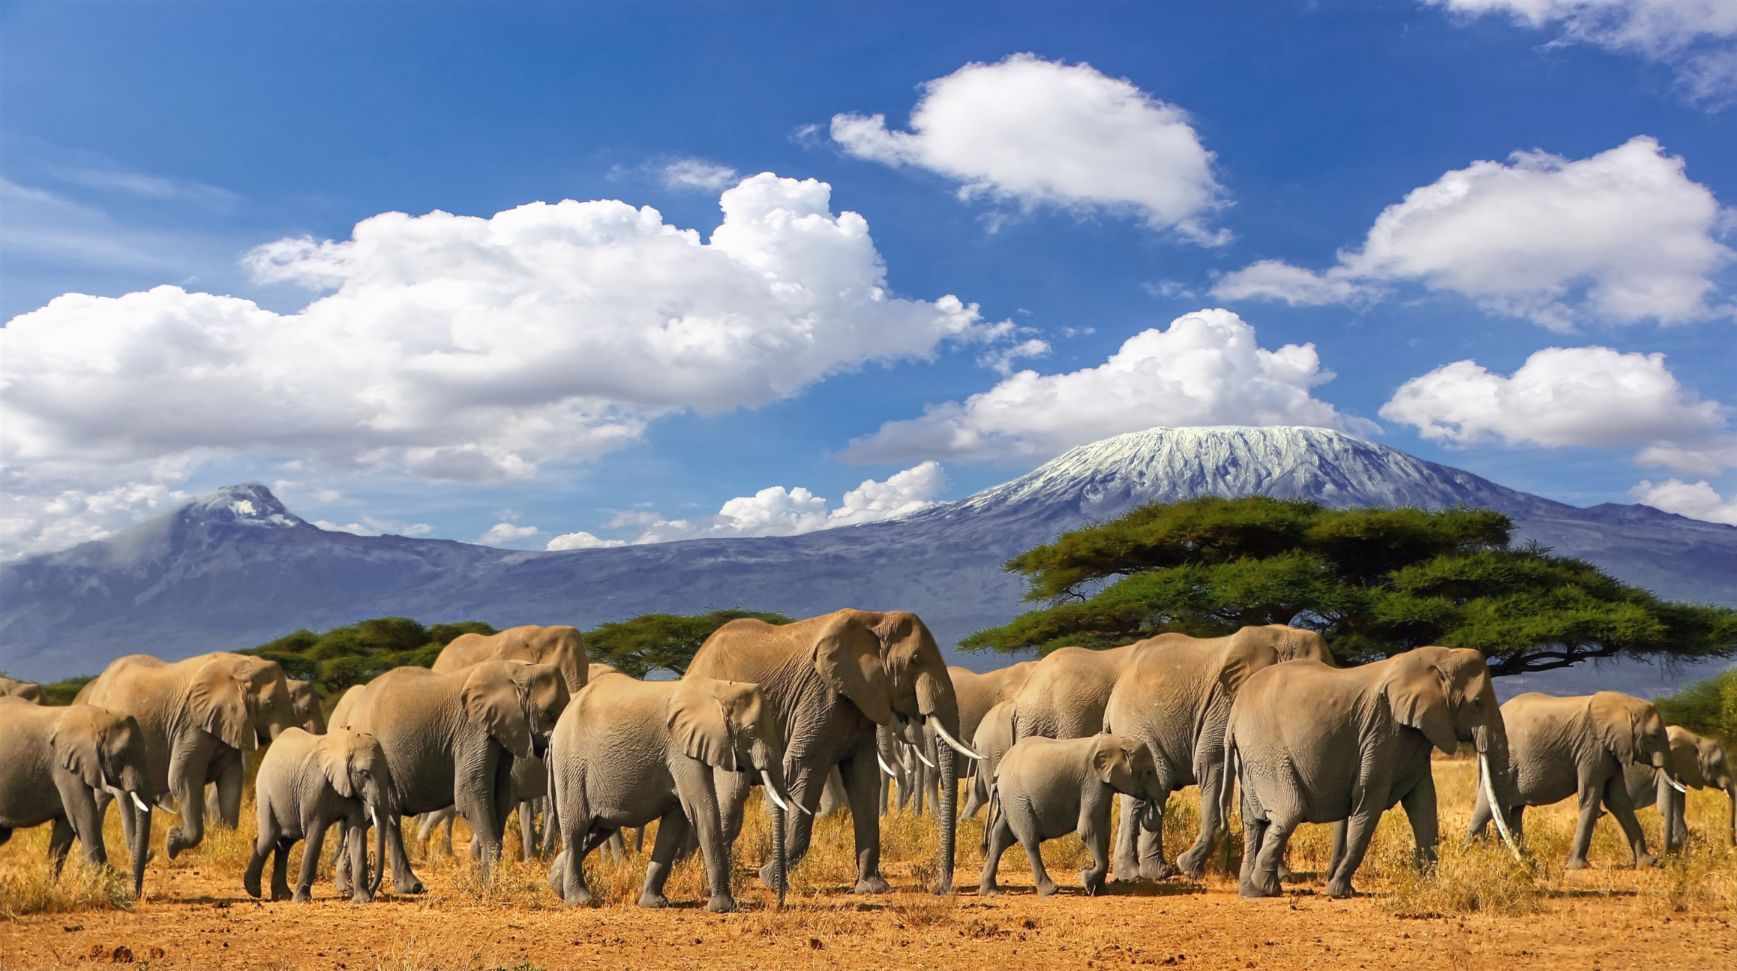 A herd of elephants in front of Mount Kilimanjaro, the tallest mountain in Africa.